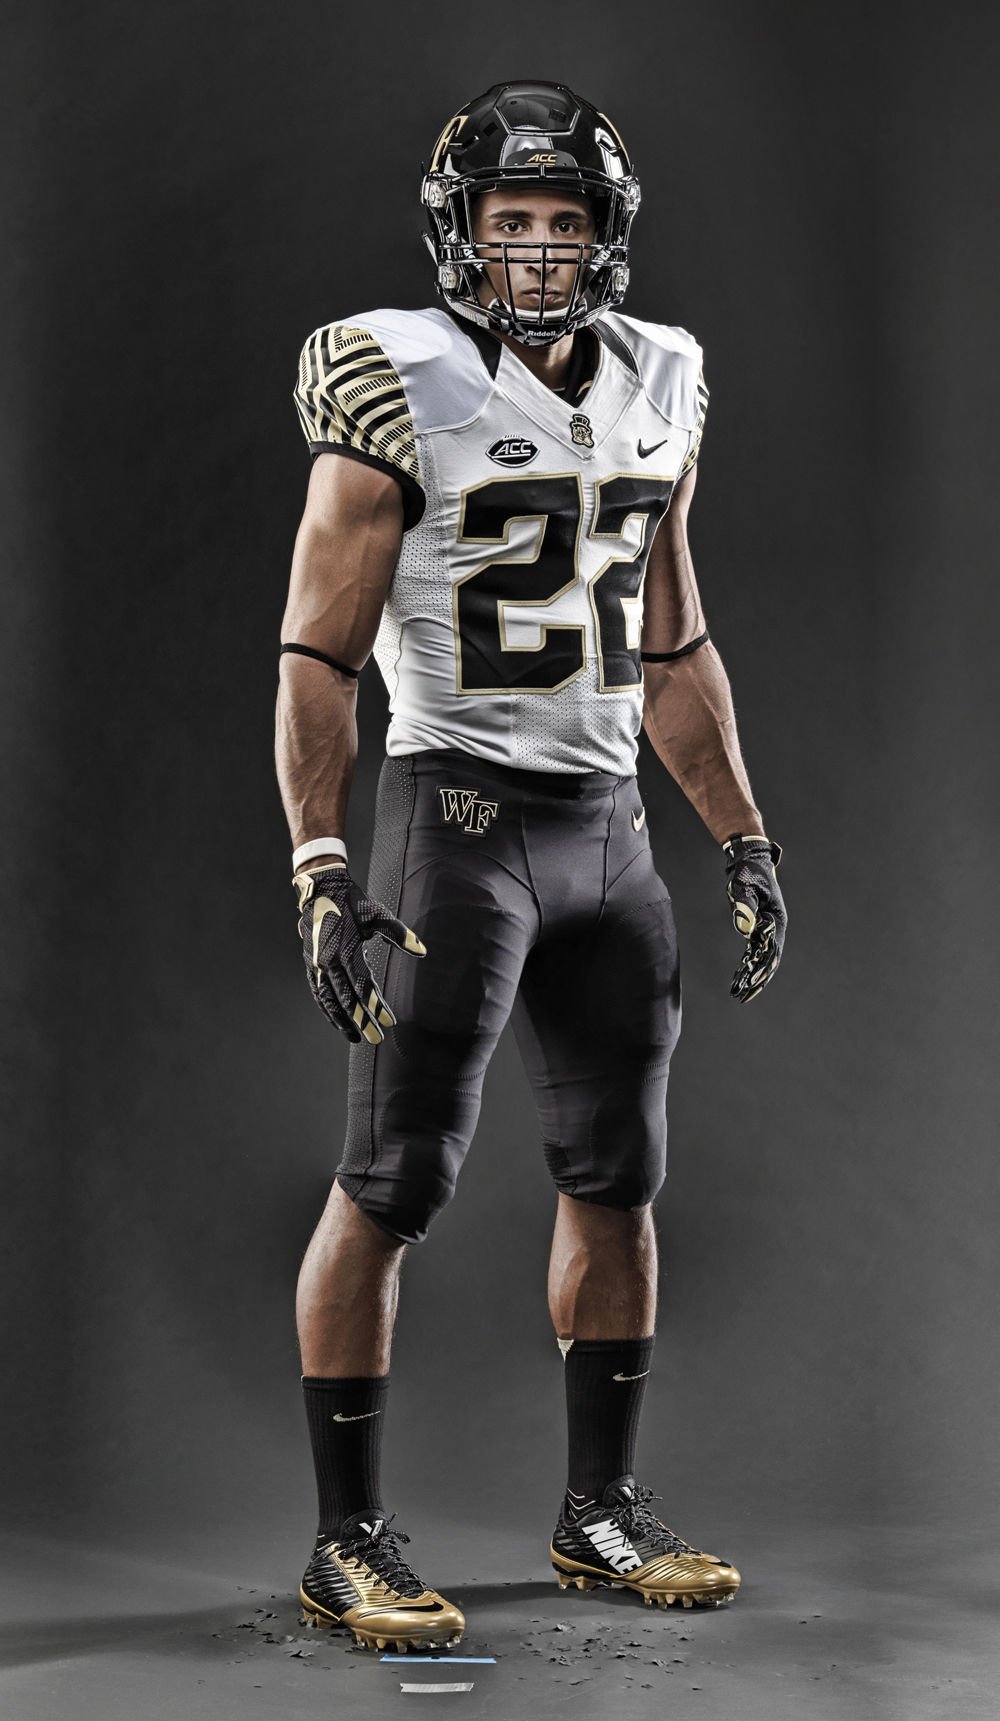 Wake Forest's new football uniforms | Galleries | journalnow.com